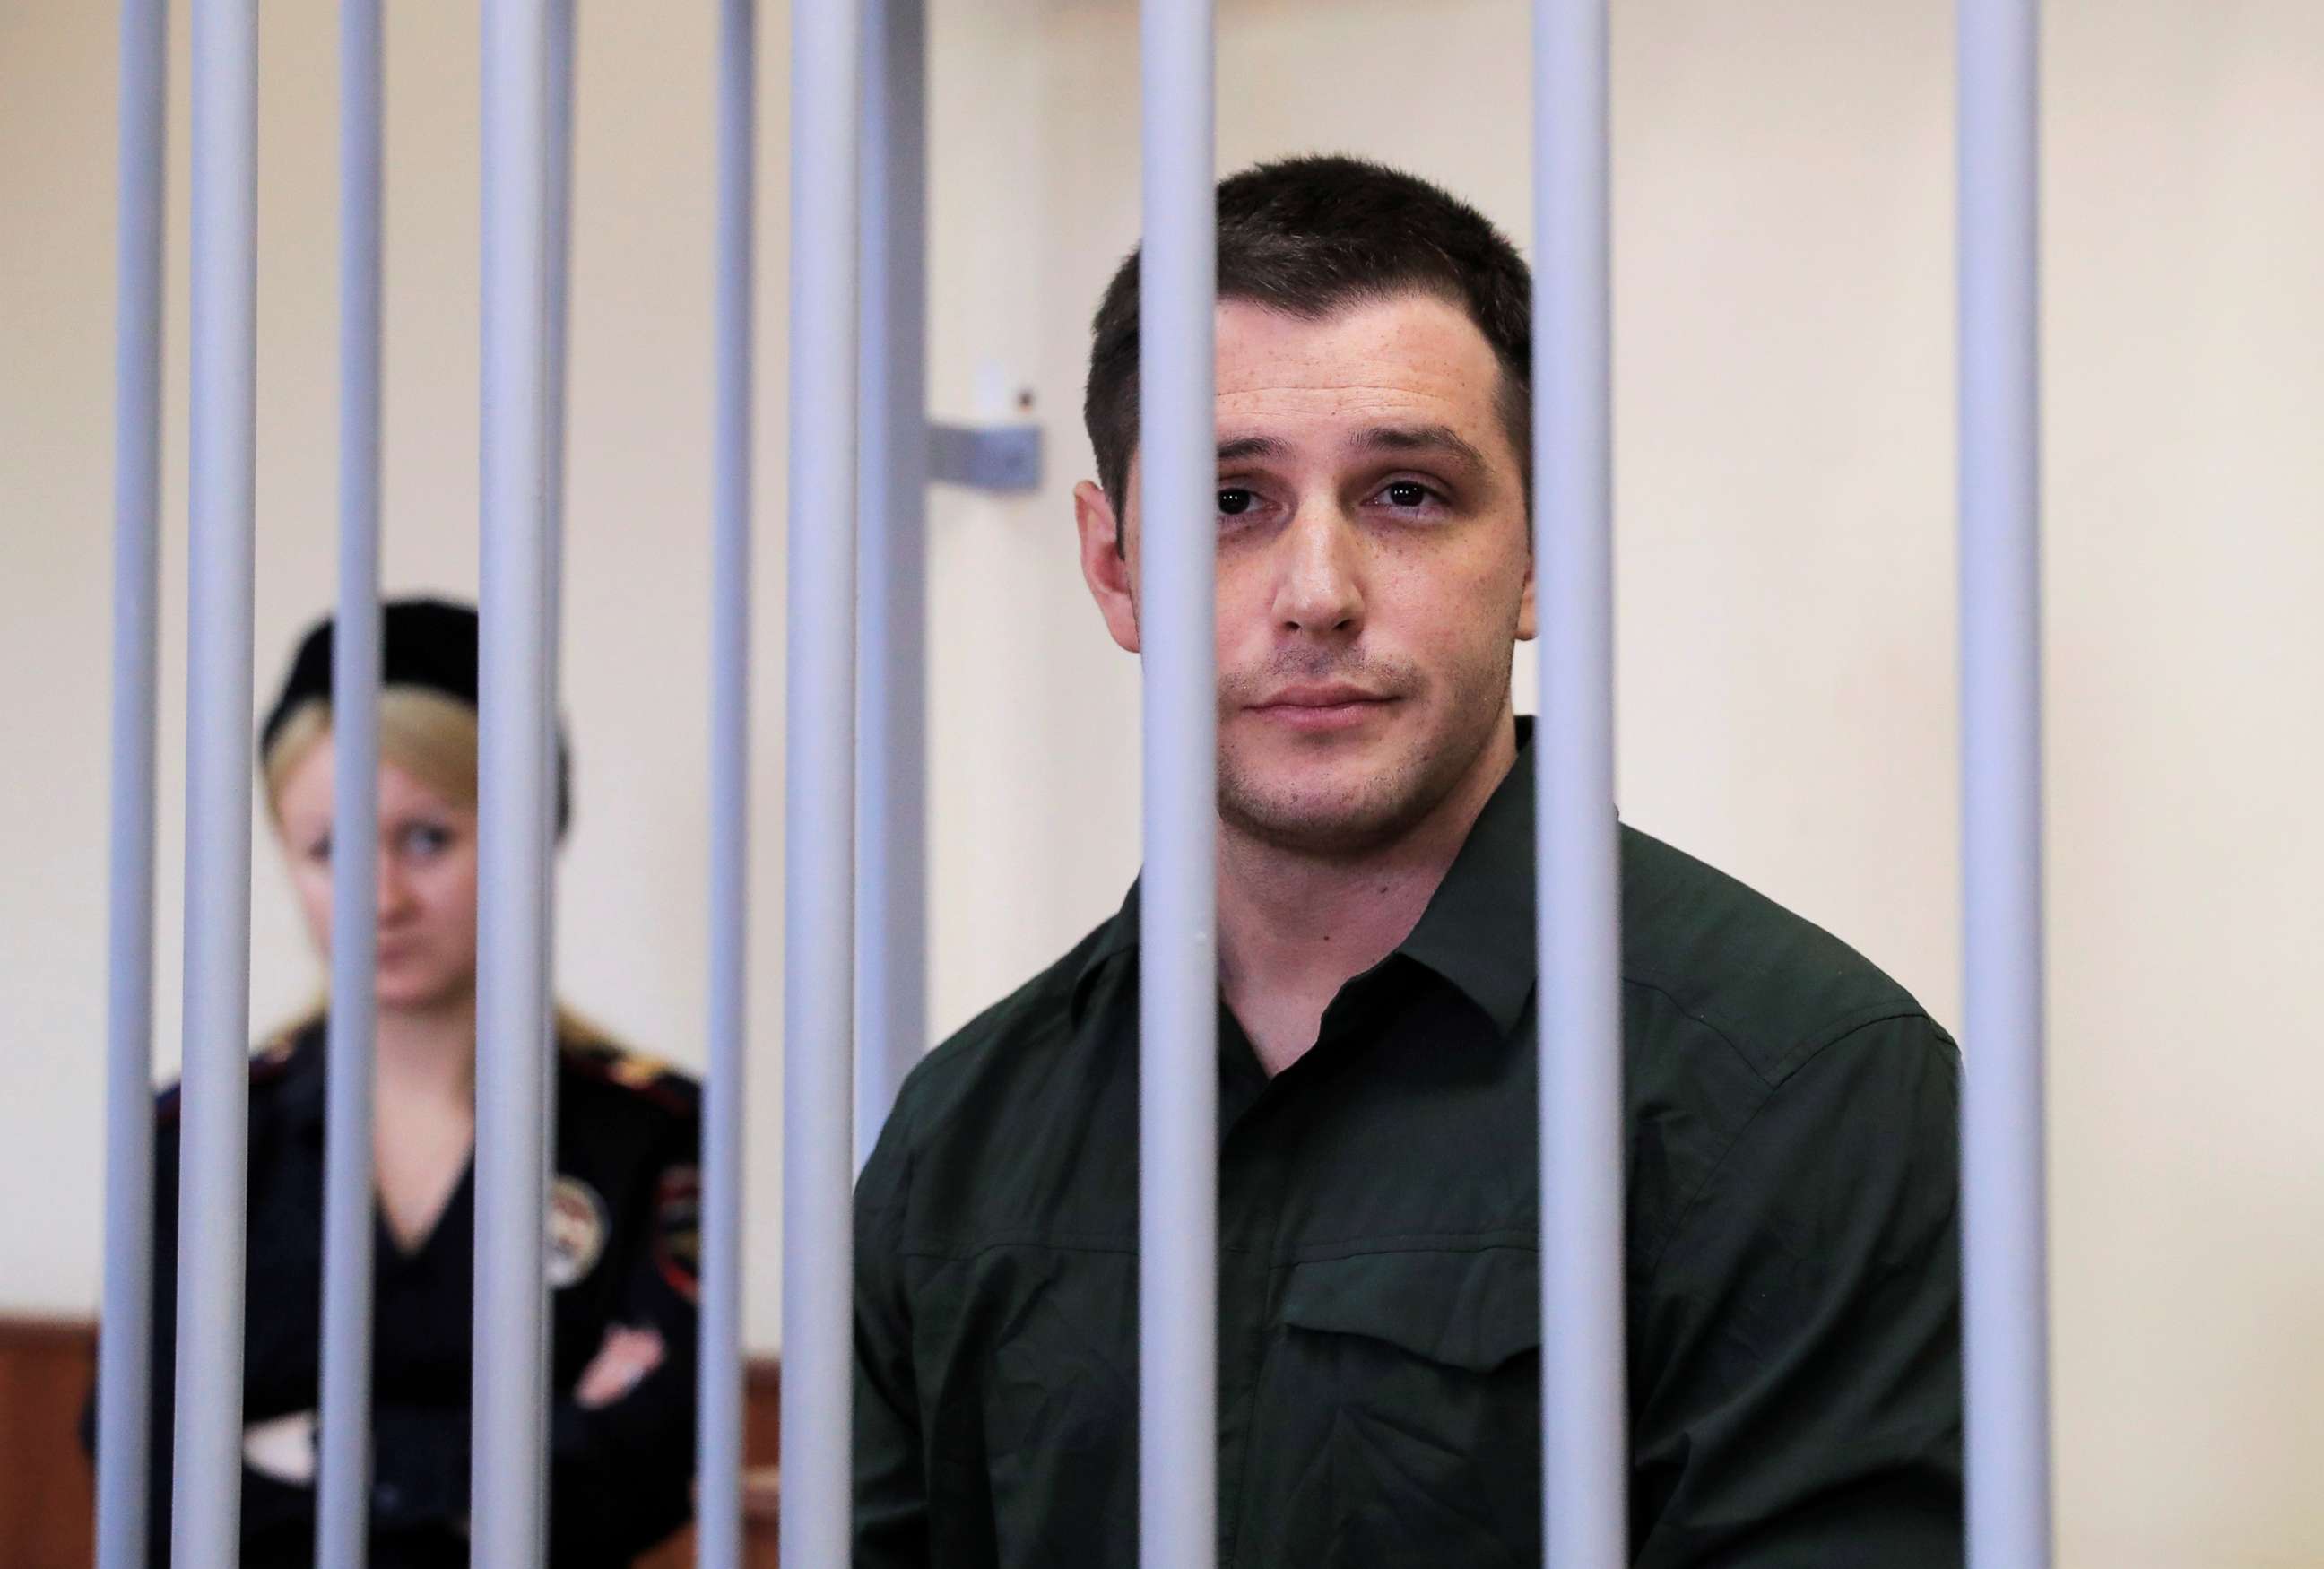 PHOTO: U.S. former Marine Trevor Reed, who was detained in 2019 and accused of assaulting police officers, stands inside a defendants' cage during a court hearing in Moscow, March 11, 2020.